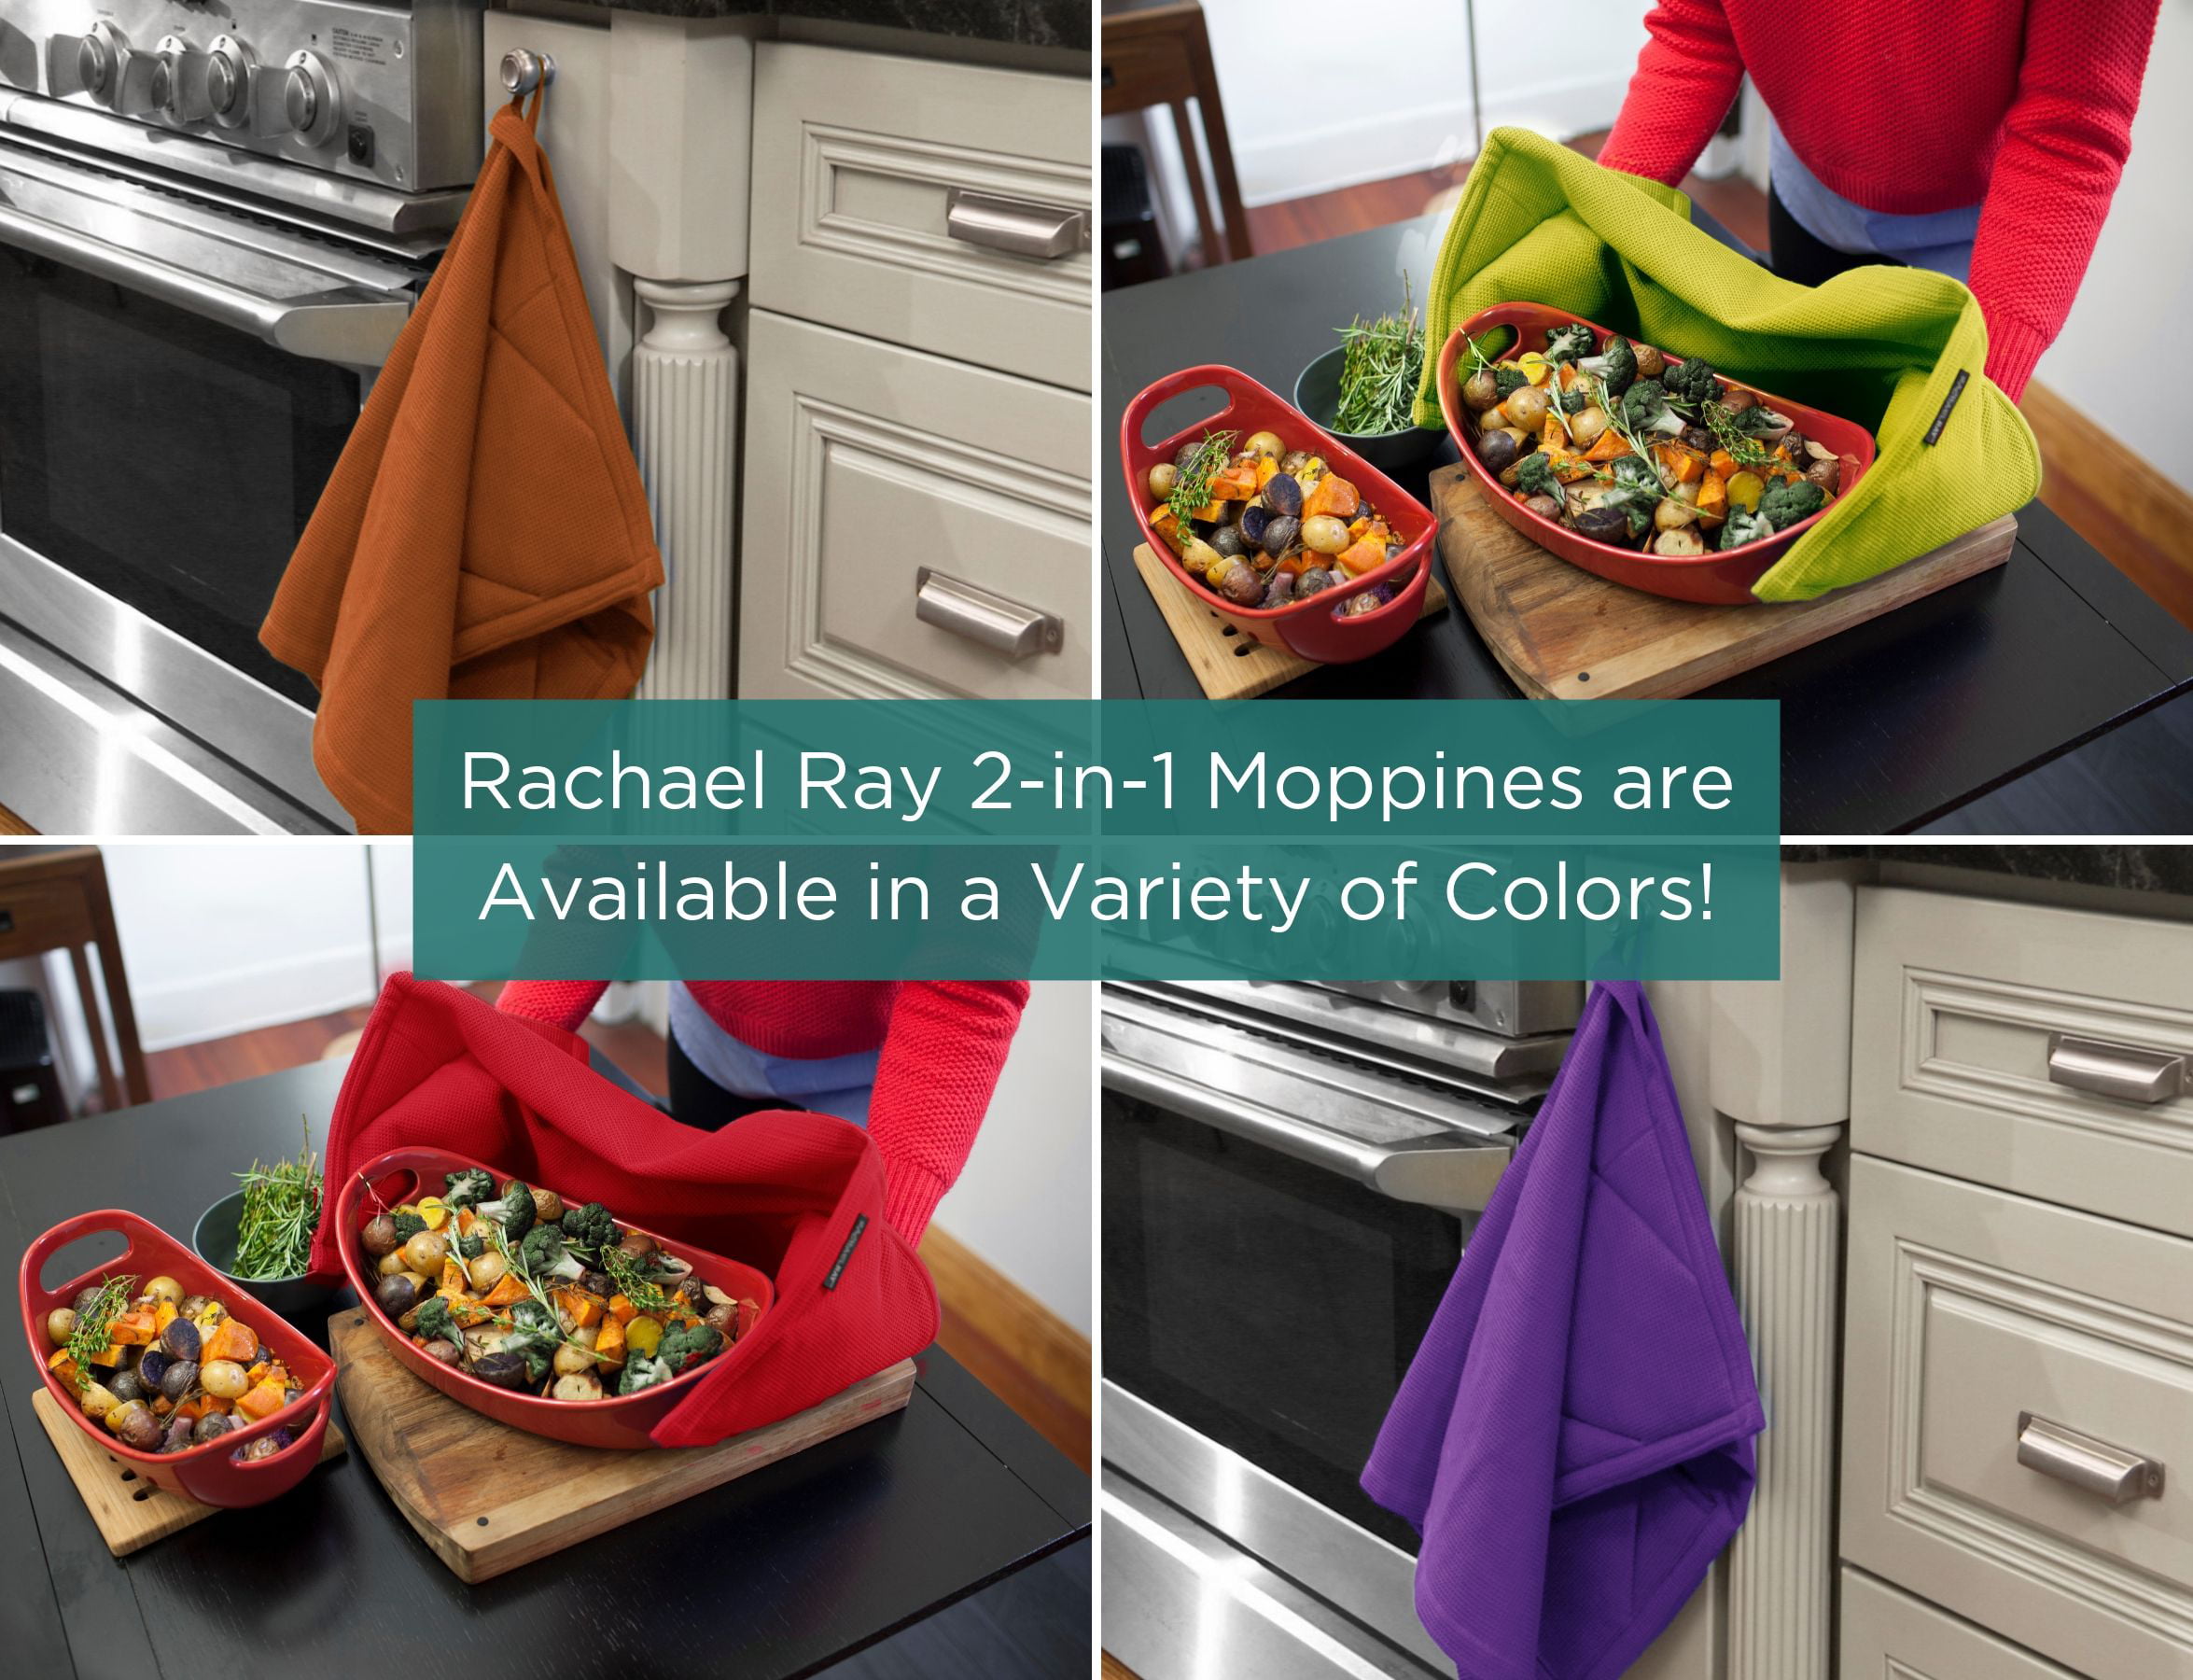 Rachael Ray Kitchen Towel, Oven Glove Moppine - 2-in-1 Ultra Absorbent  Kitchen Towels with Heat Resistant Padded Pockets Like Pot Holders and Oven